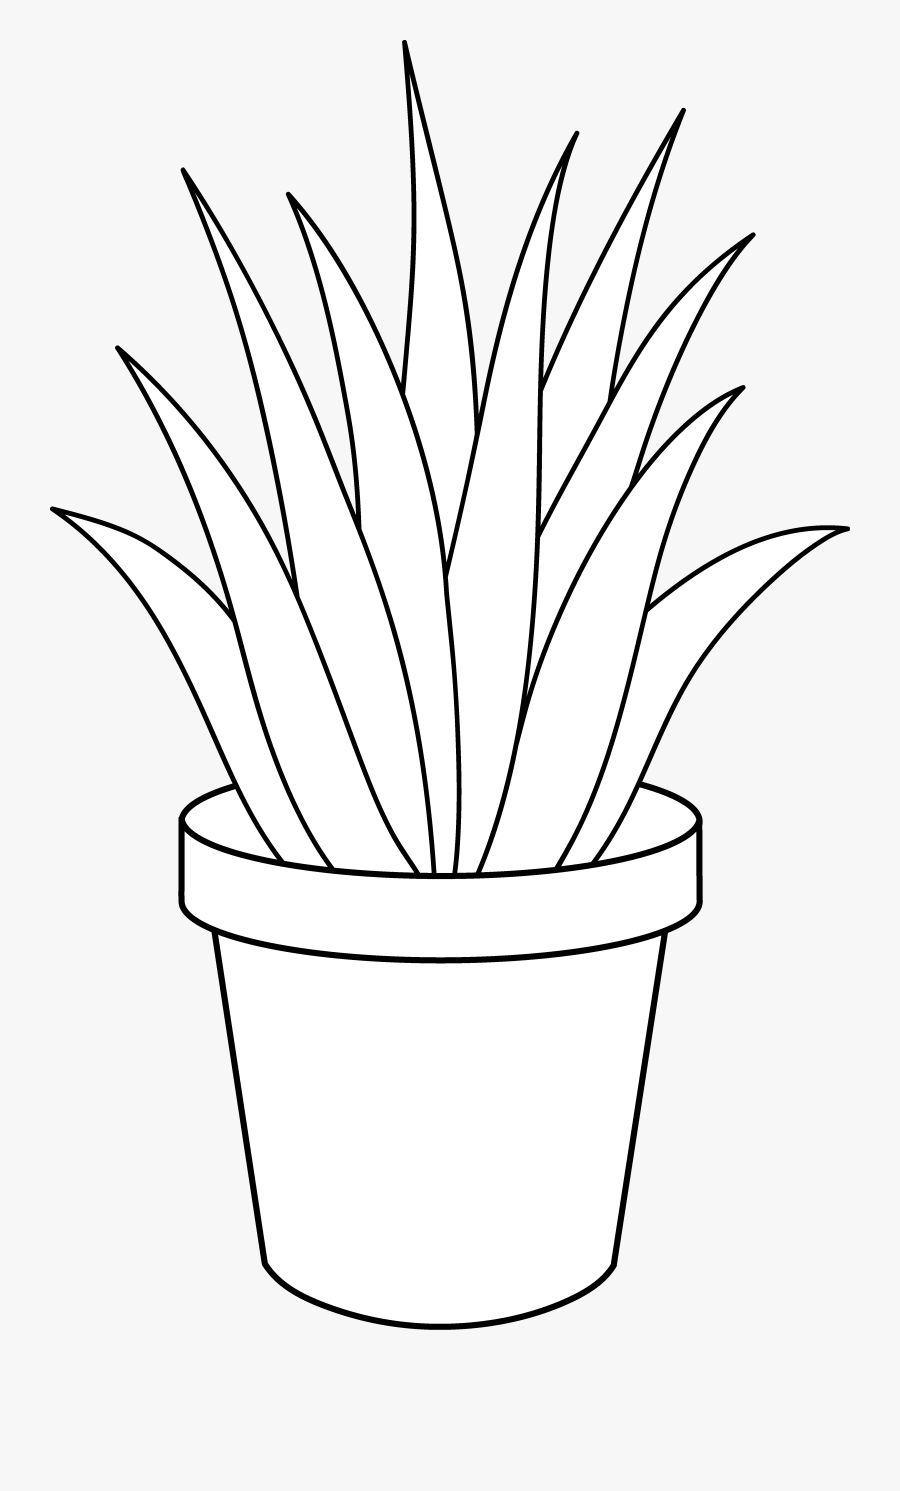 Pot Plant Clipart Baby - Potted Plant Clipart Black And White, Transparent Clipart